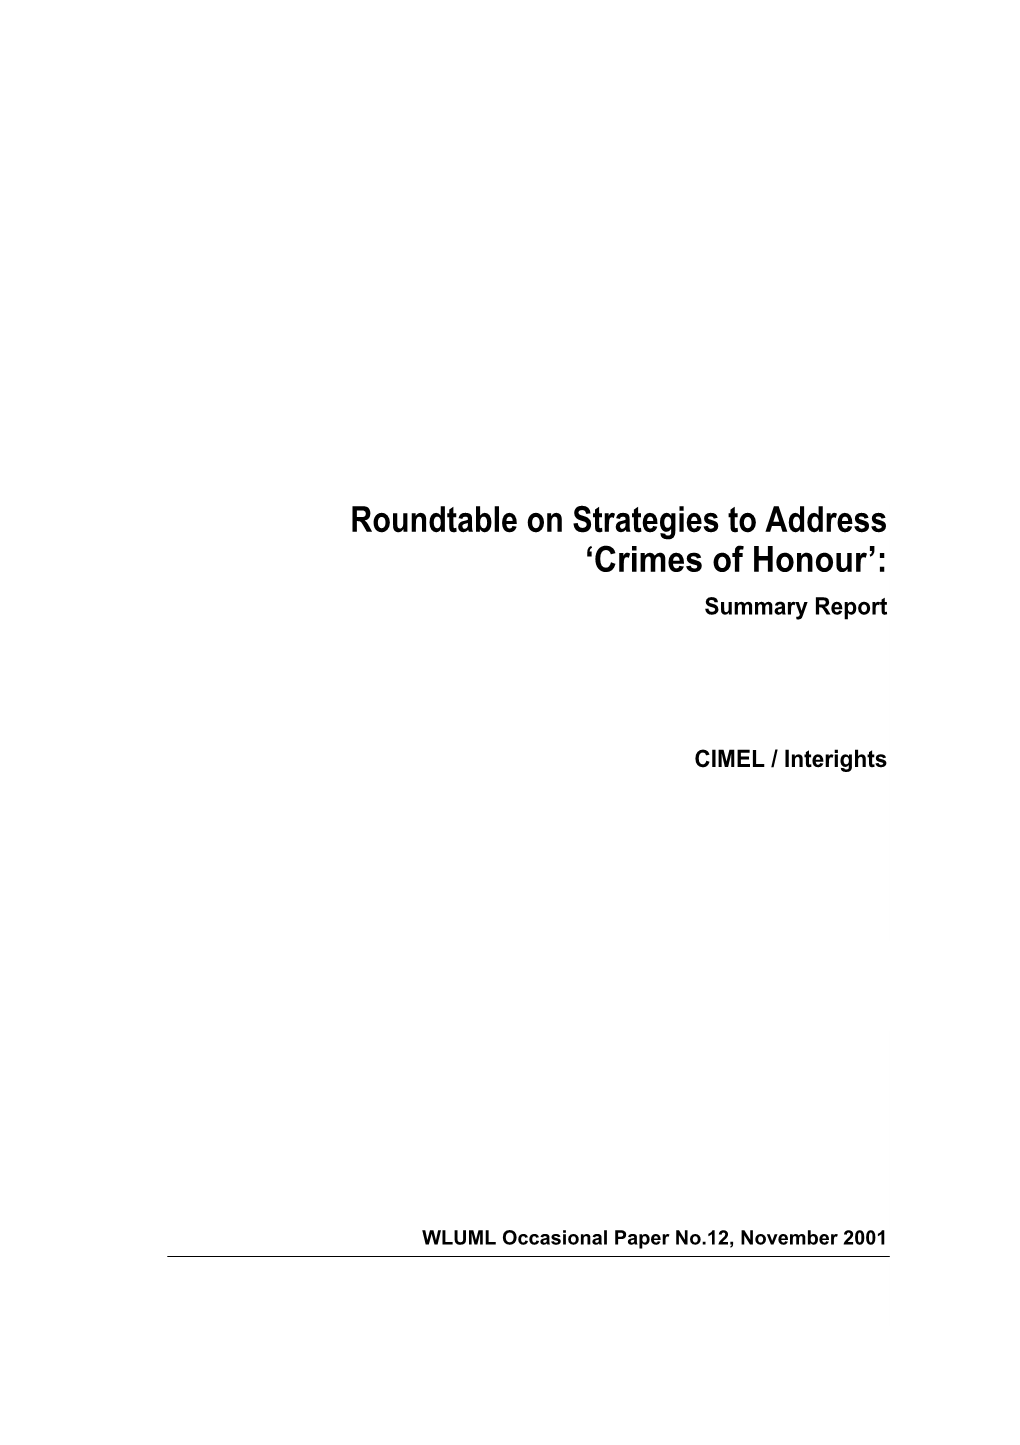 Crimes of Honour’: Summary Report